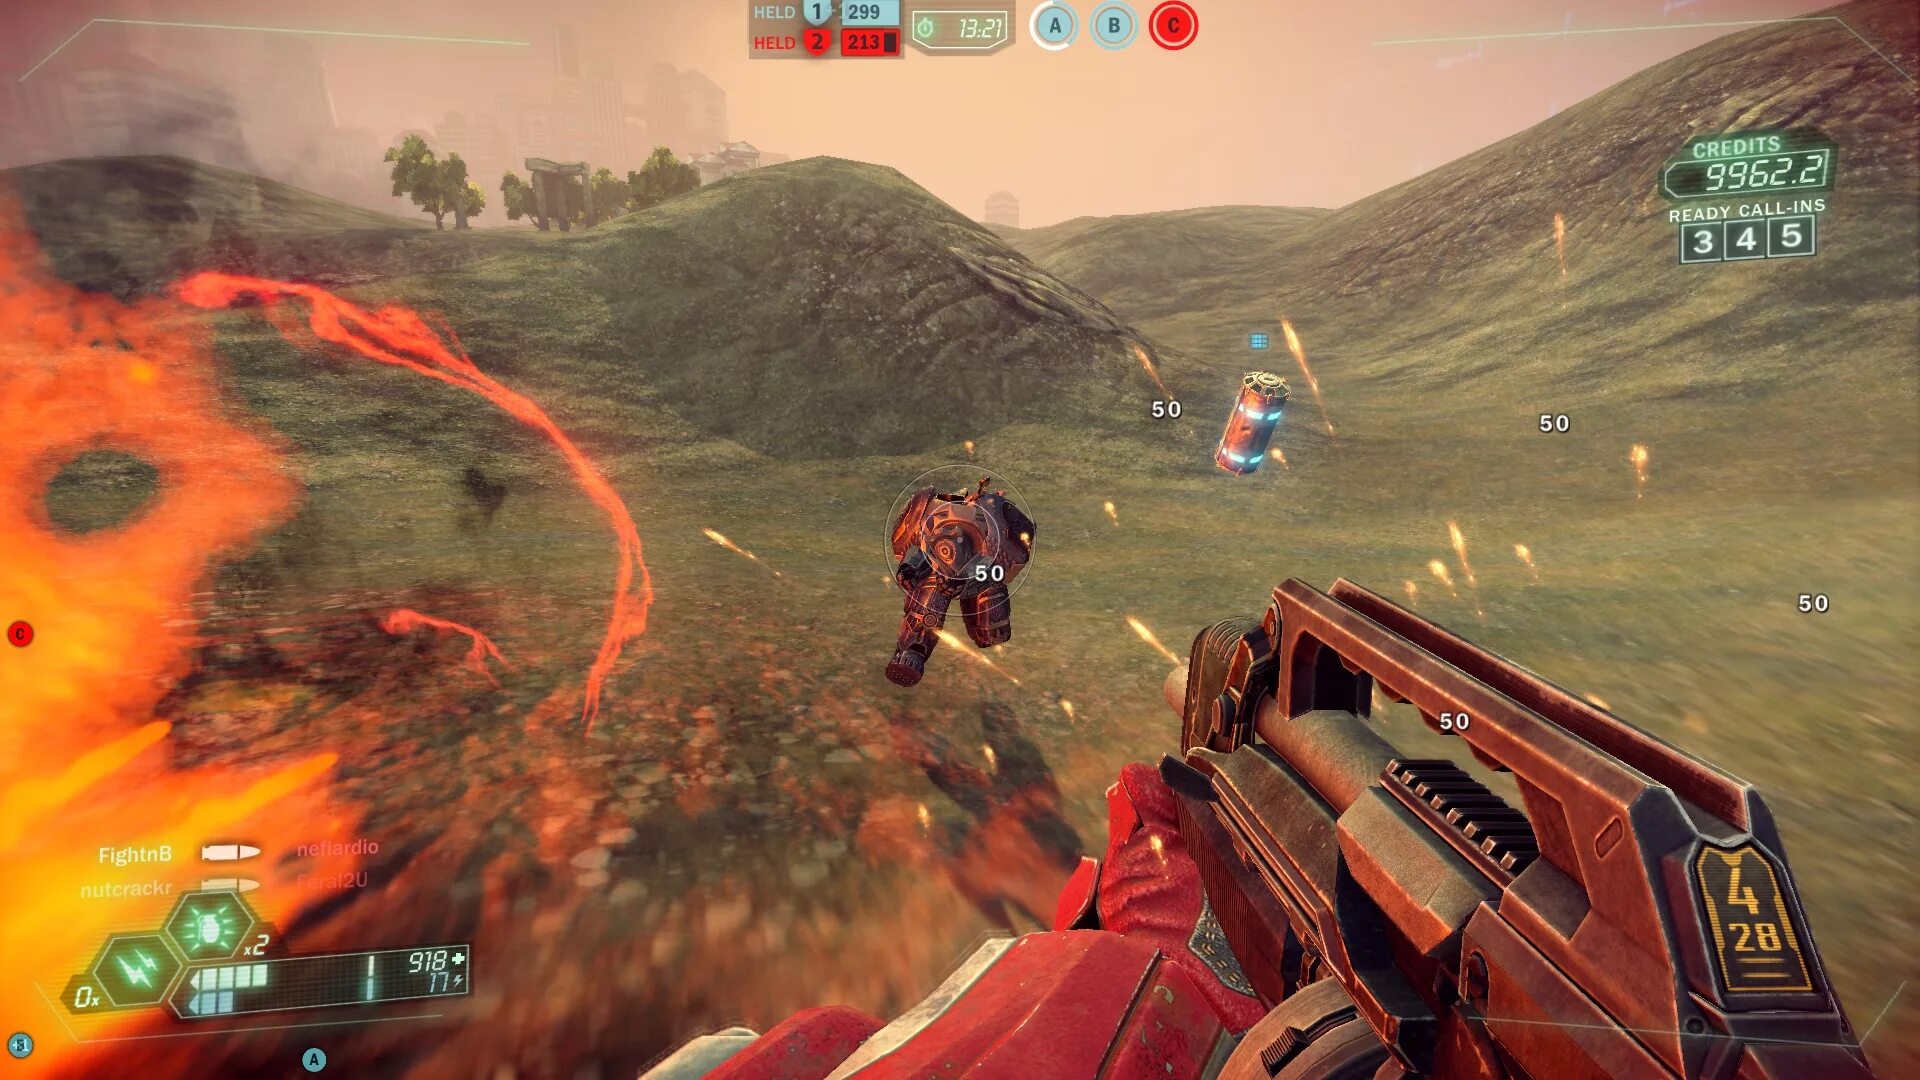 Tribes rivals. Игра Tribes Ascend. Tribes: Ascend Tribes 2. Tribes Ascend Infiltrator арт. Tribes Ascend (2012).